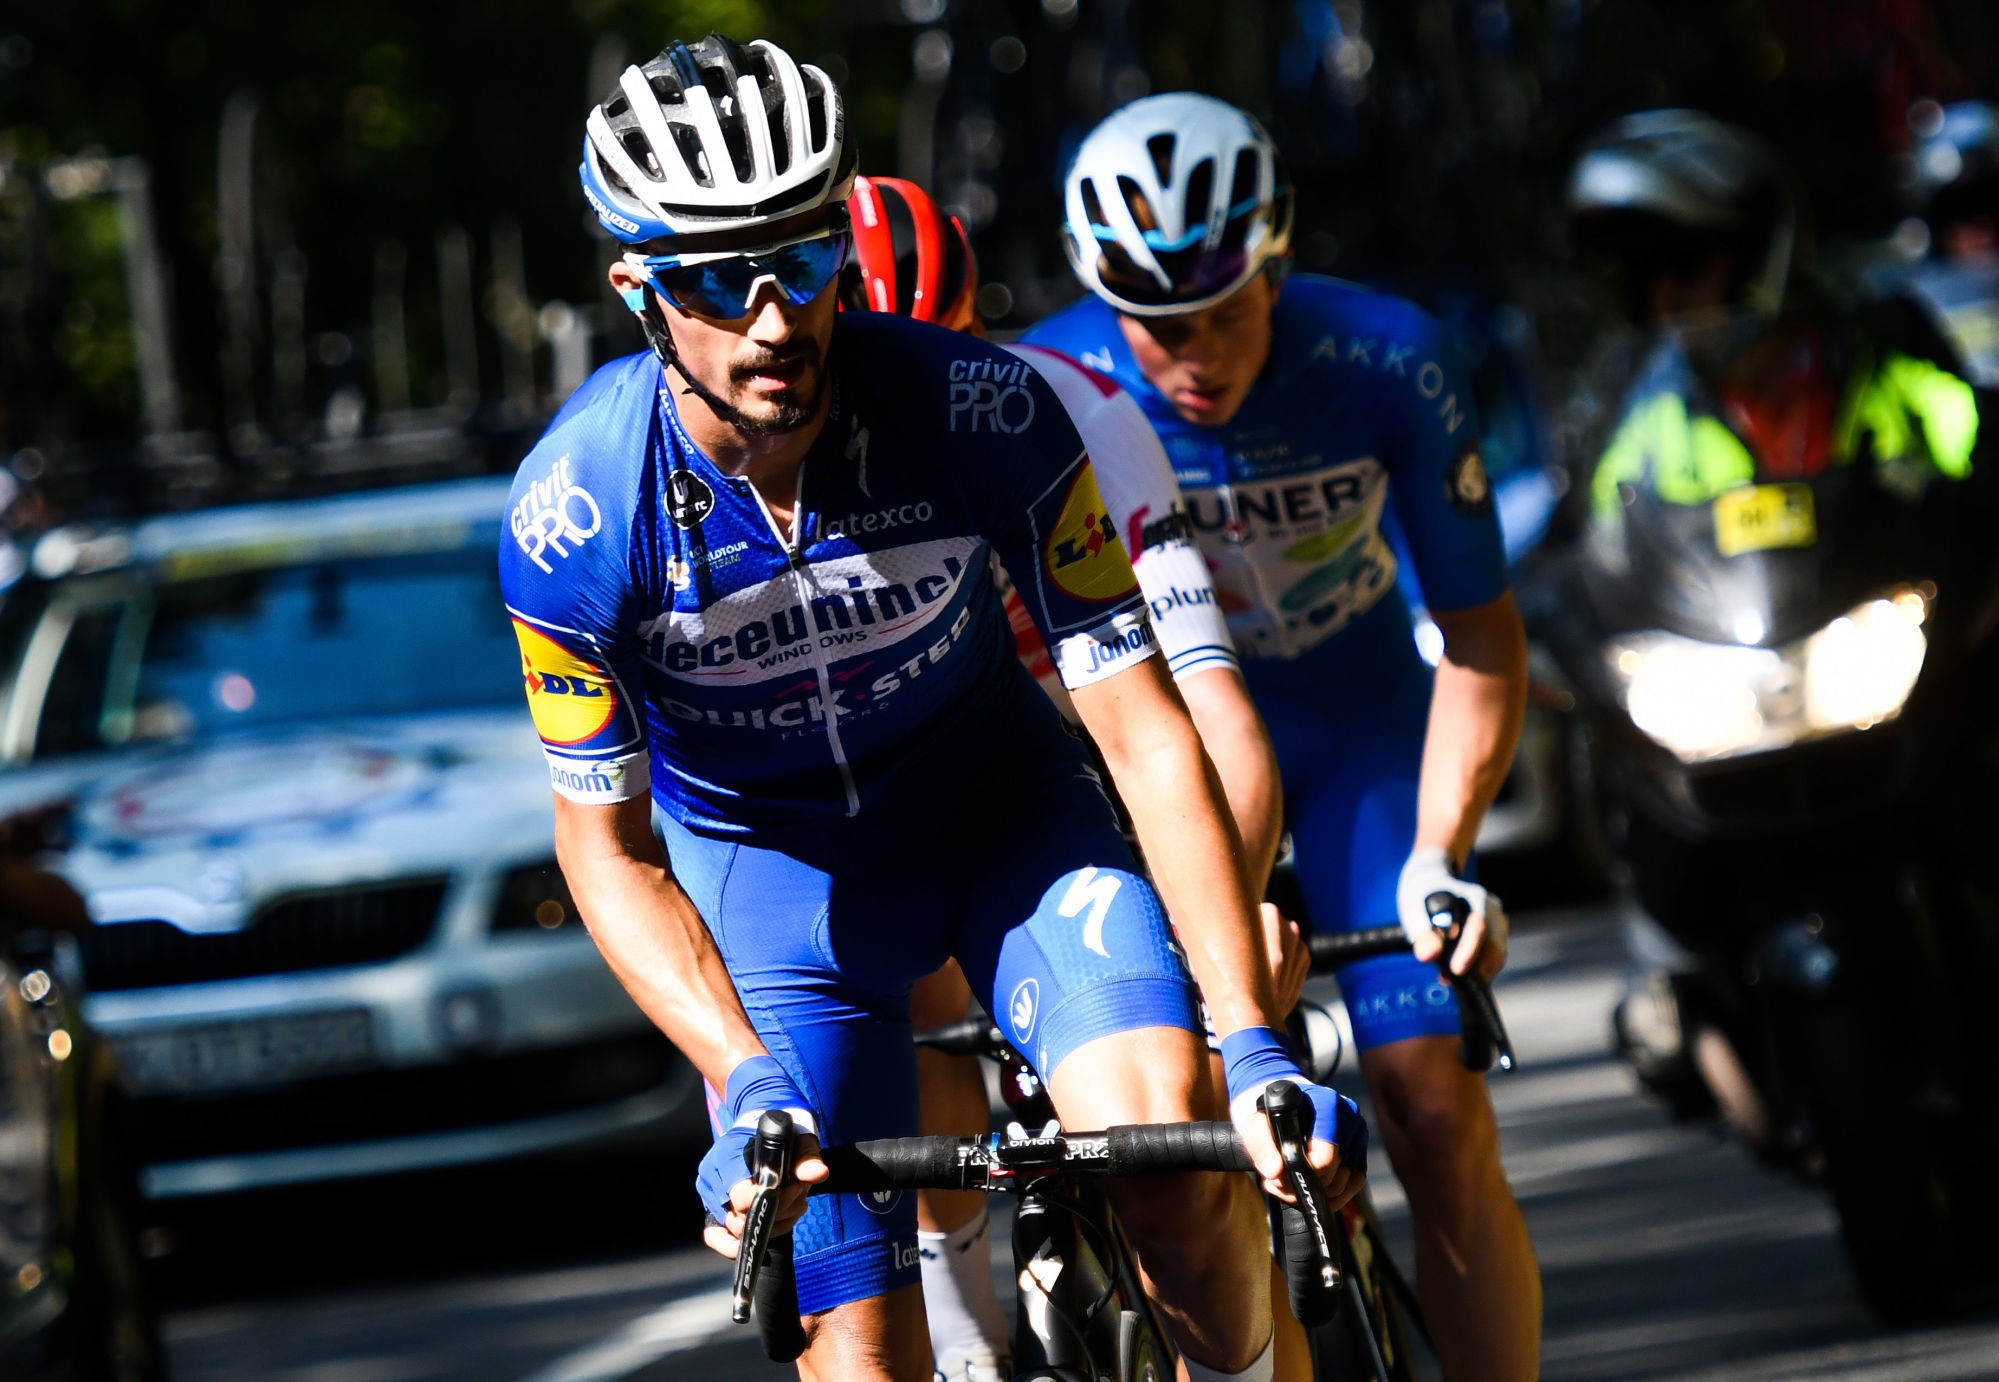 31 August 2019, Gottingen: Cycling: UCI Europaserie - Germany Tour, 3rd stage, Gottingen - Eisenach (189,00 km). Frenchman Julian Alaphilippe (front) of Team Deceuninck-Quickstep leads the top group.  Photo: Bernd Thissen / PictureAlliance / Icon Sport - Julian ALAPHILIPPE